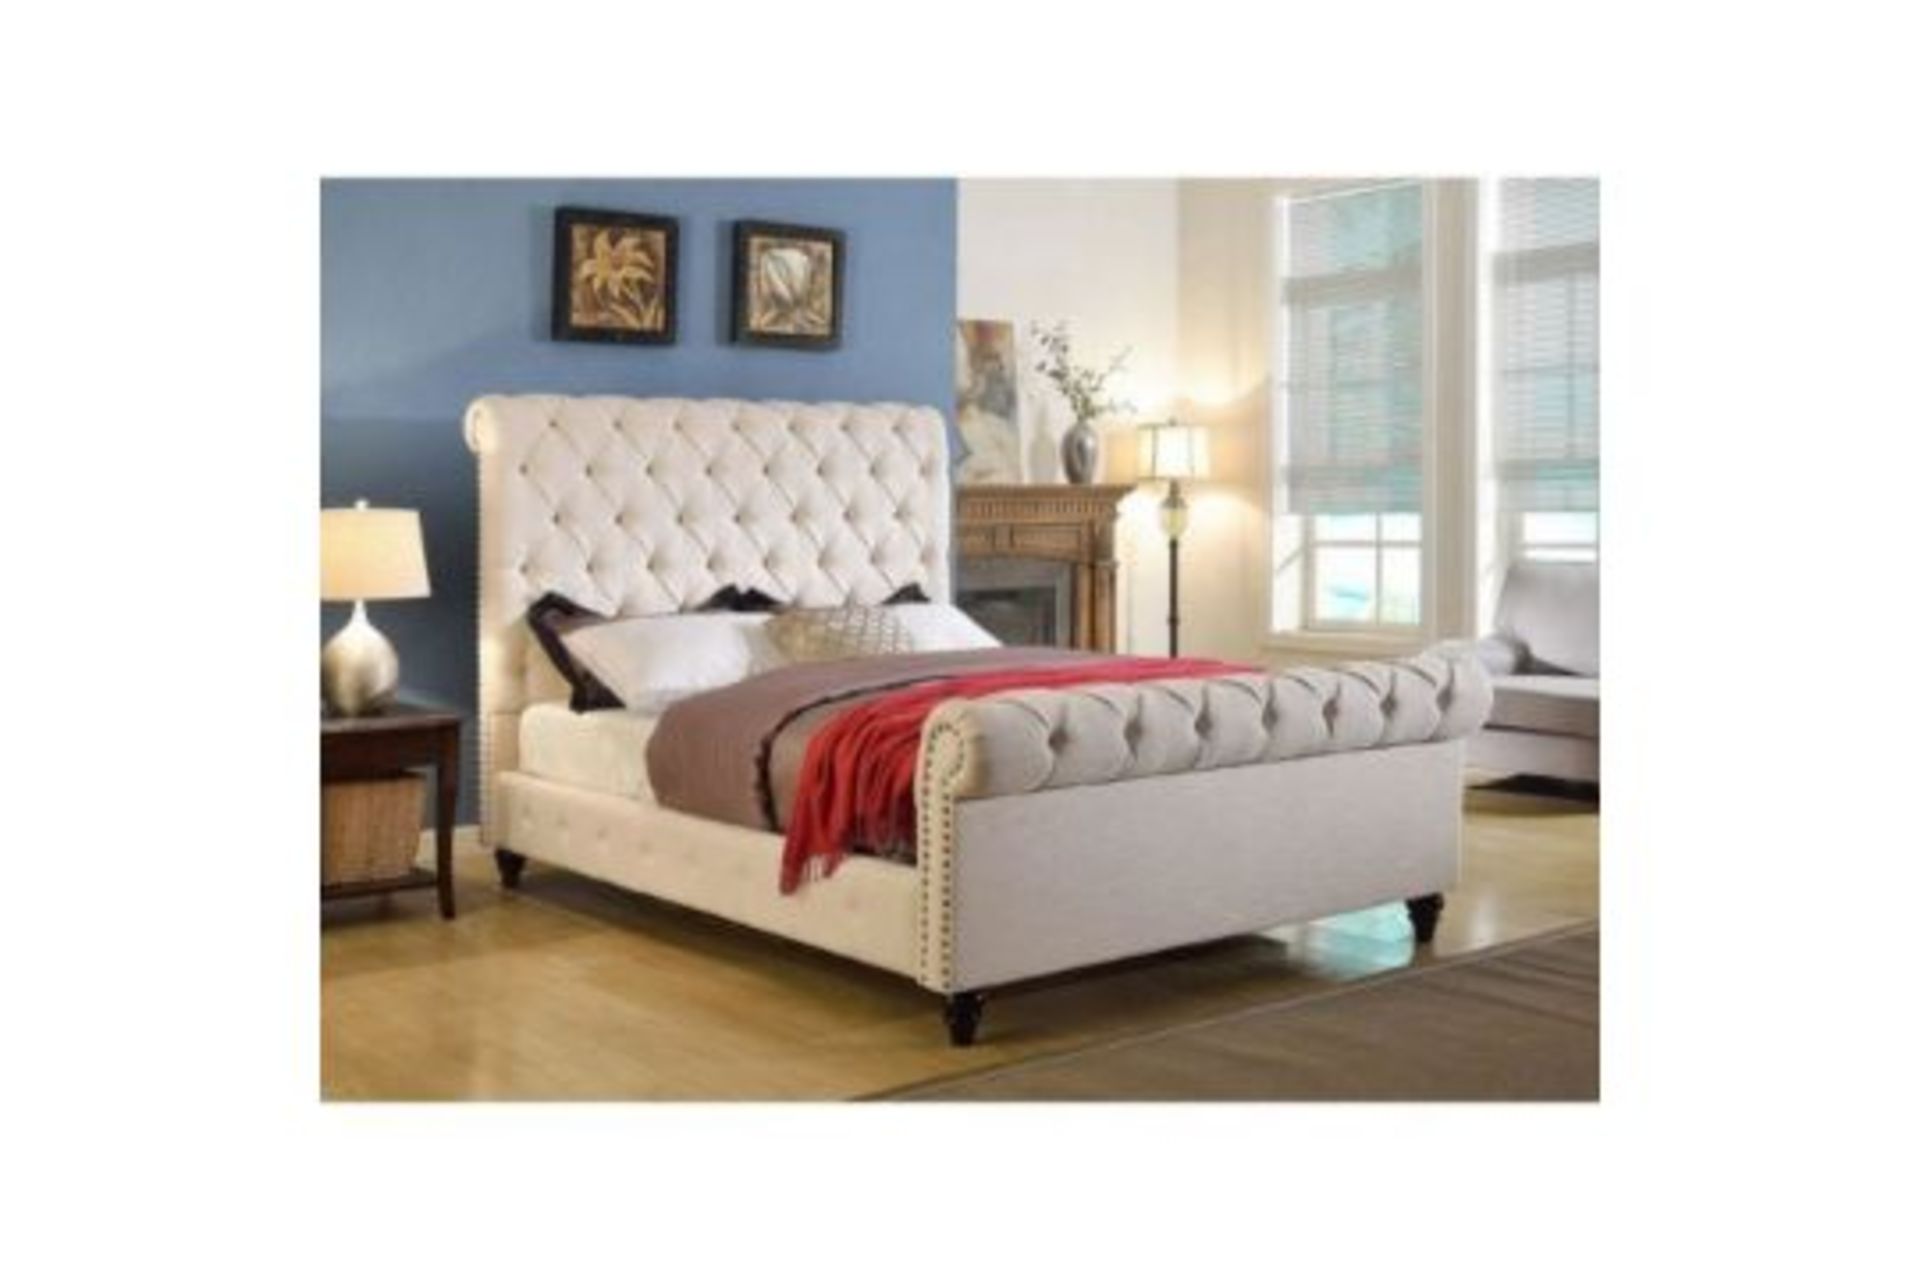 Duchess King Size Sleigh Bed Champagne Velvet A Truly Glamourous Sleigh Bed This Bed Frame Is